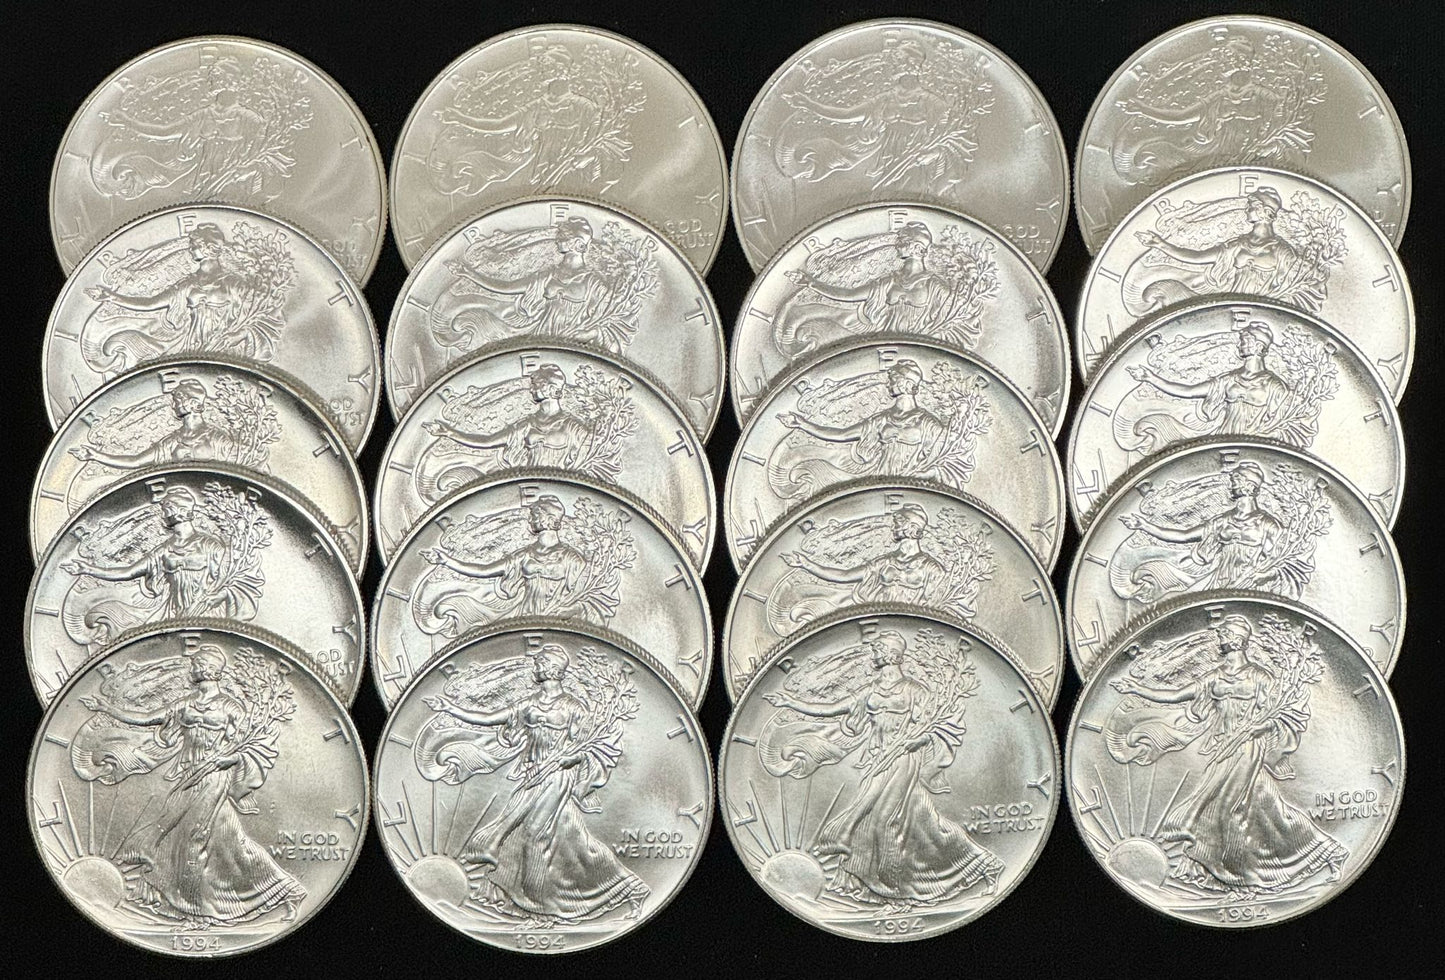 1994 Silver Eagle - Business Strike - Uncirculated - CoinsTV